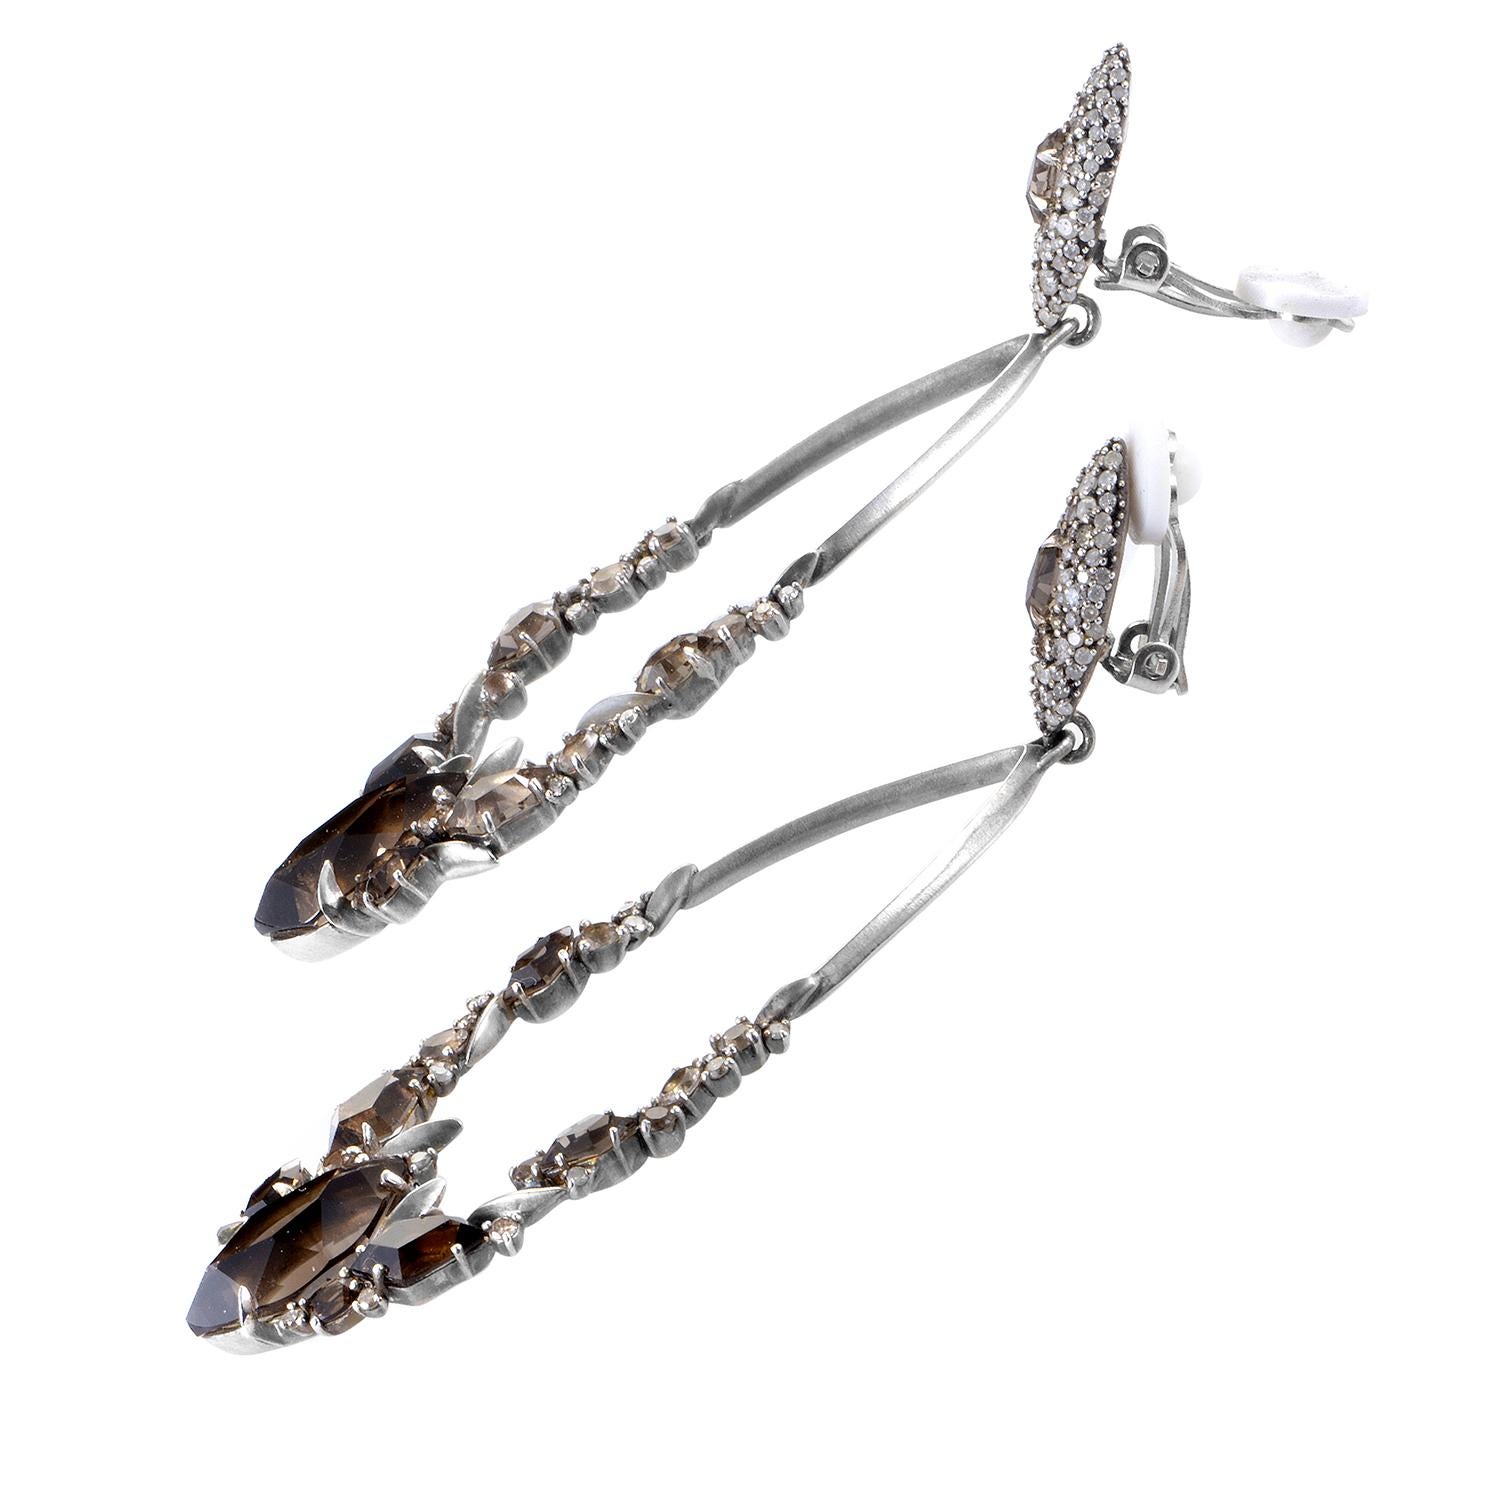 This exquisite pair of earrings from Alexis Bittar represents decadence by design. The sterling silver marquis-shaped chandeliers are beautifully clustered in smoky quartz and diamond stones with center point marquise-cut smoky quartz. The fronts of